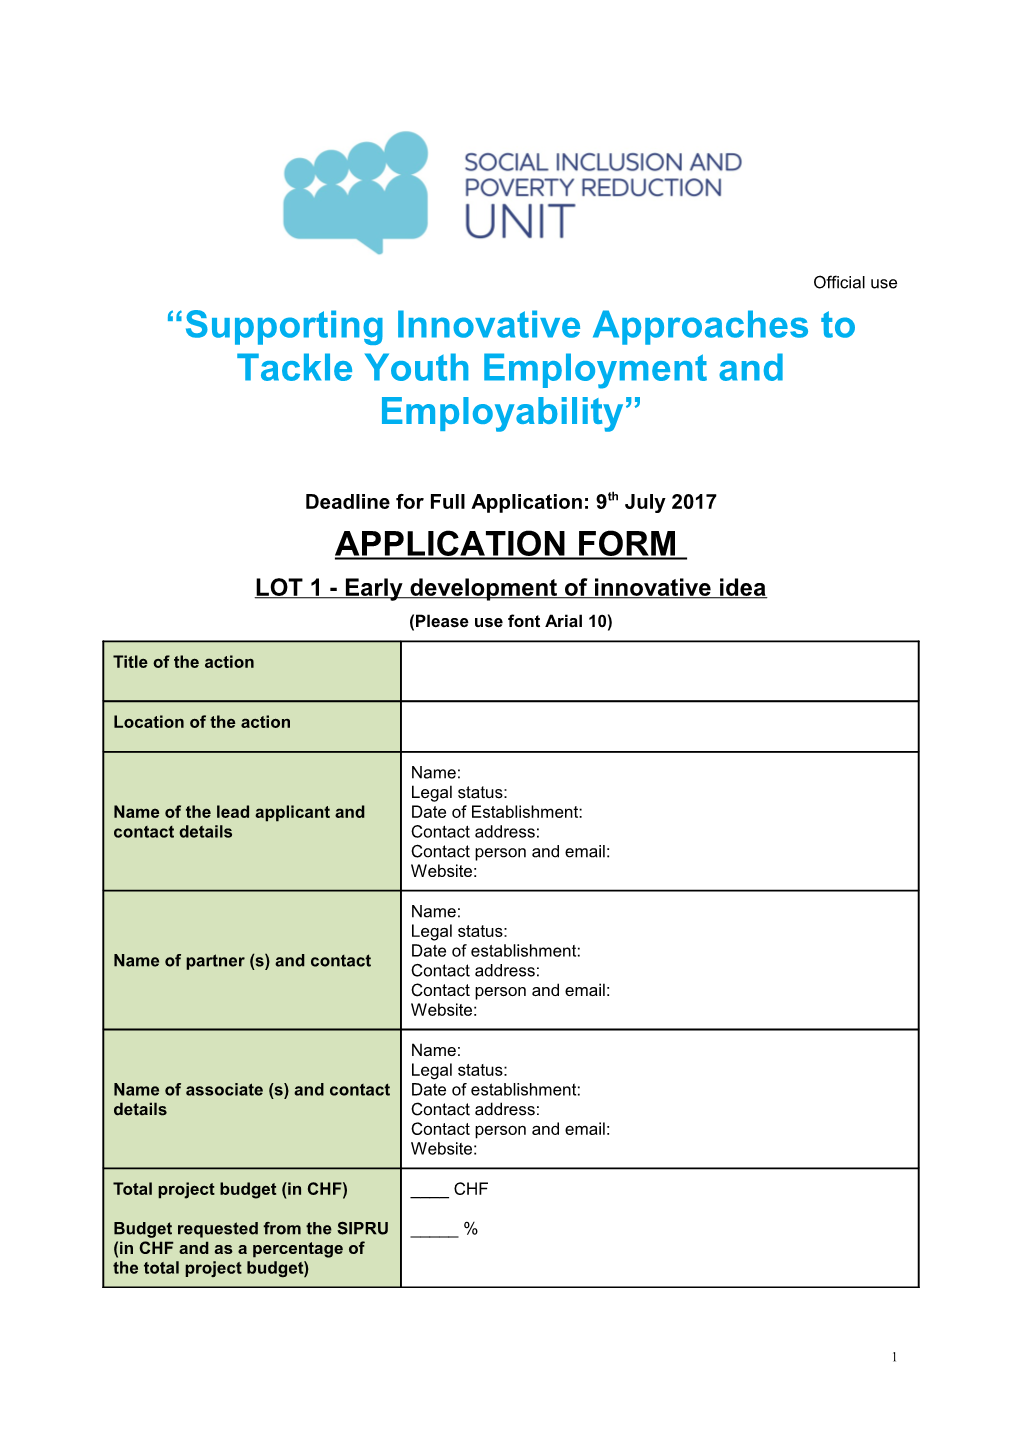 Supporting Innovative Approaches to Tackle Youth Employment and Employability